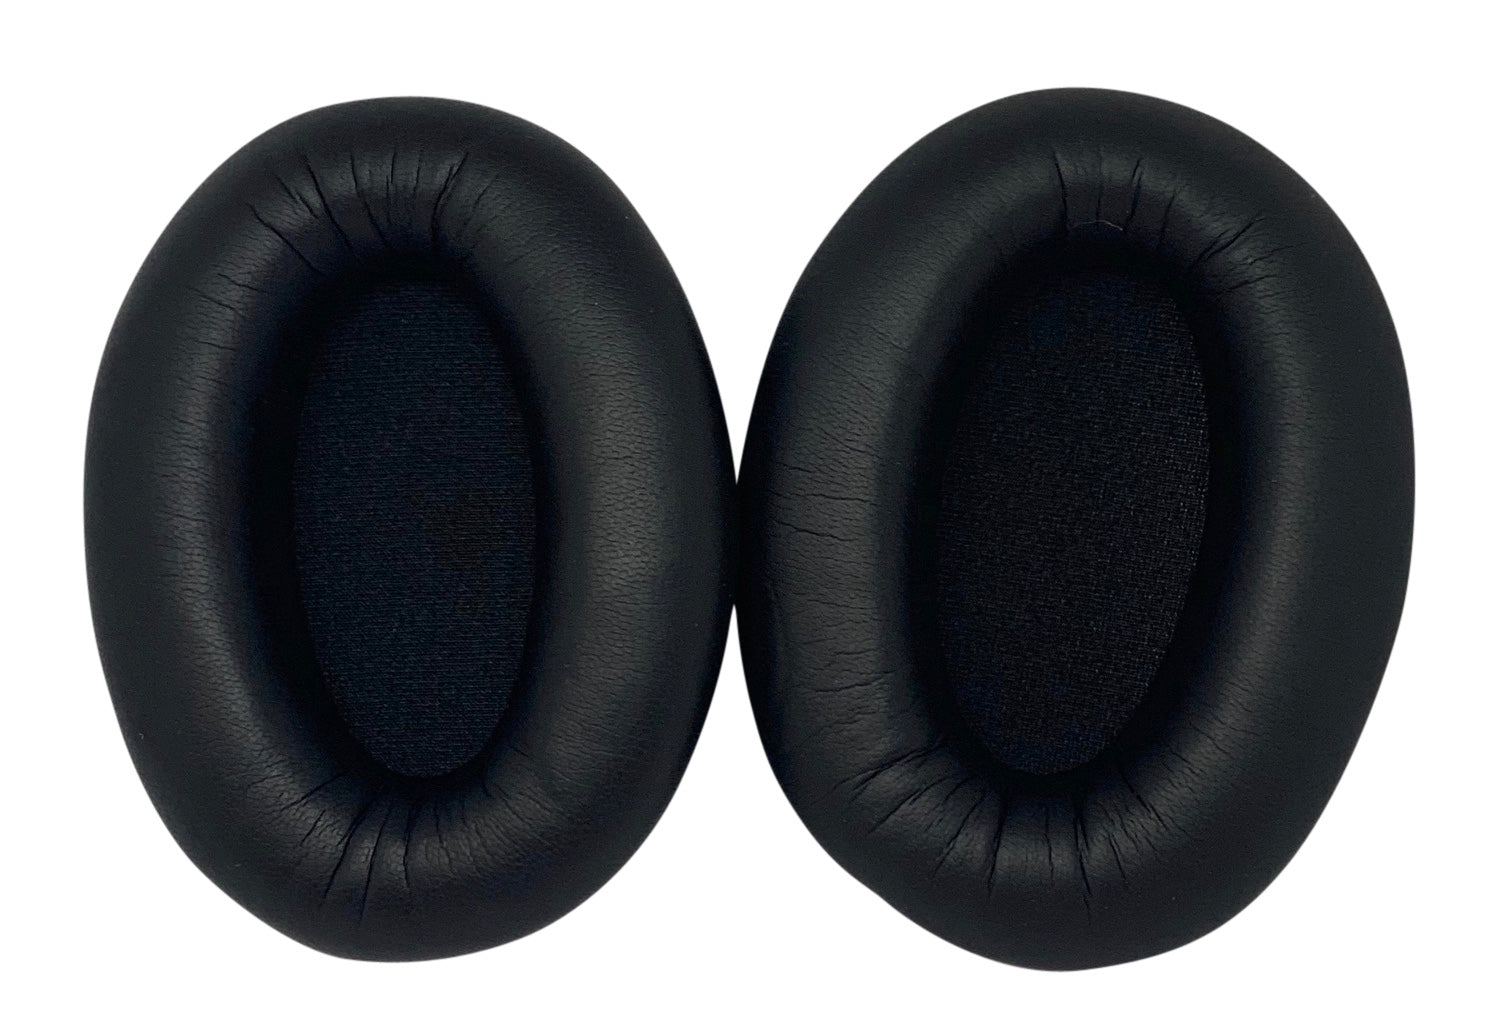 Pair Replacement Ear Pad Cushions Parts for Sony WH-1000XM3